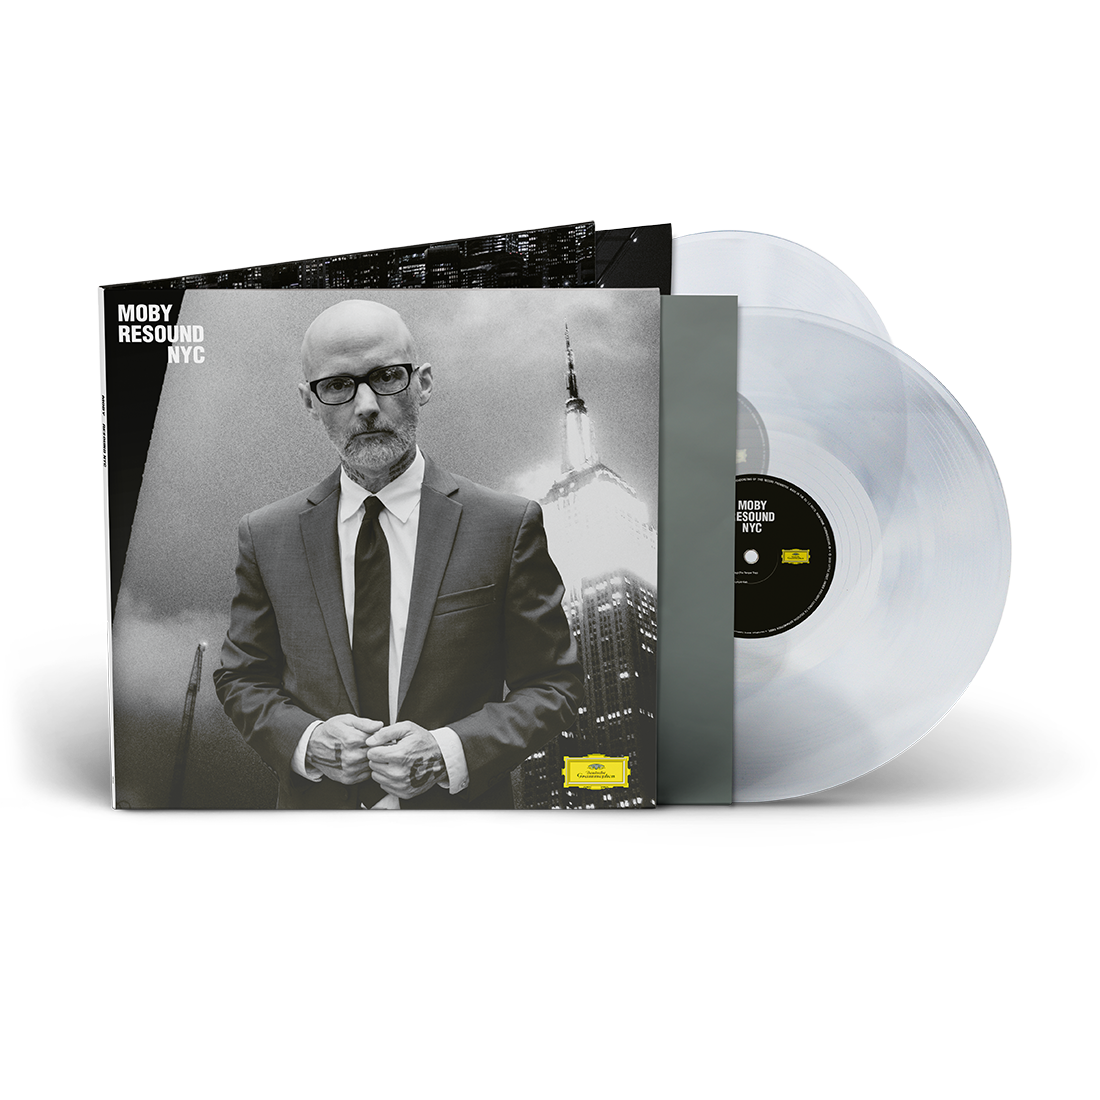 MOBY - Resound NYC: Crystal Clear Vinyl 2LP